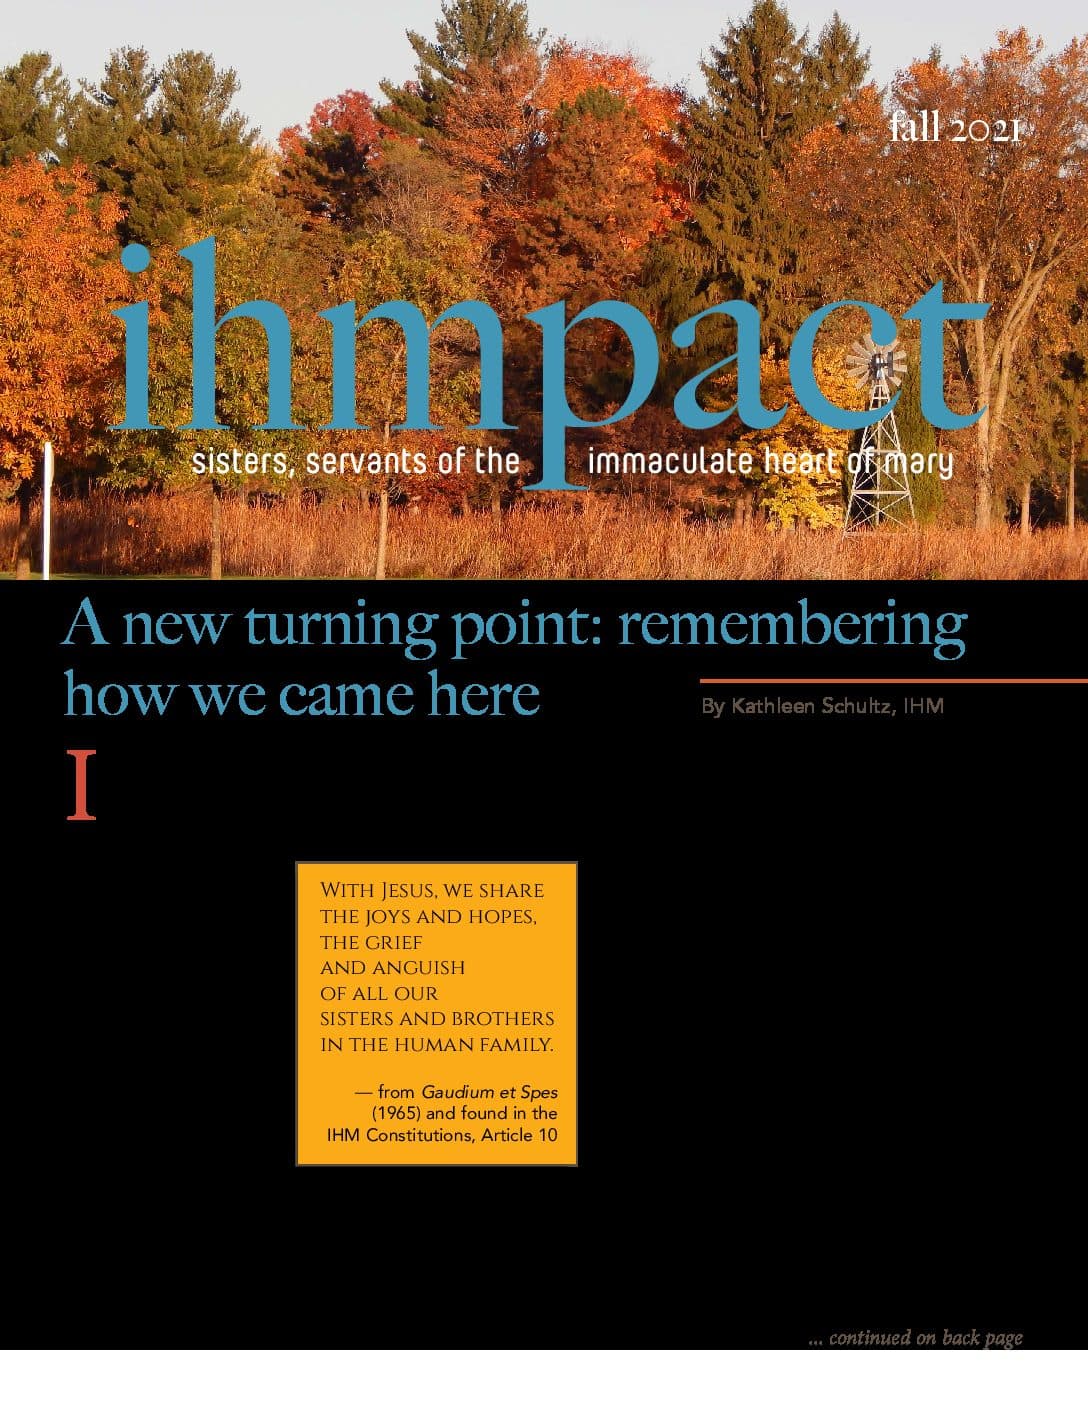 ihmpact FALL 2021 INTERACTIVE Feature Image